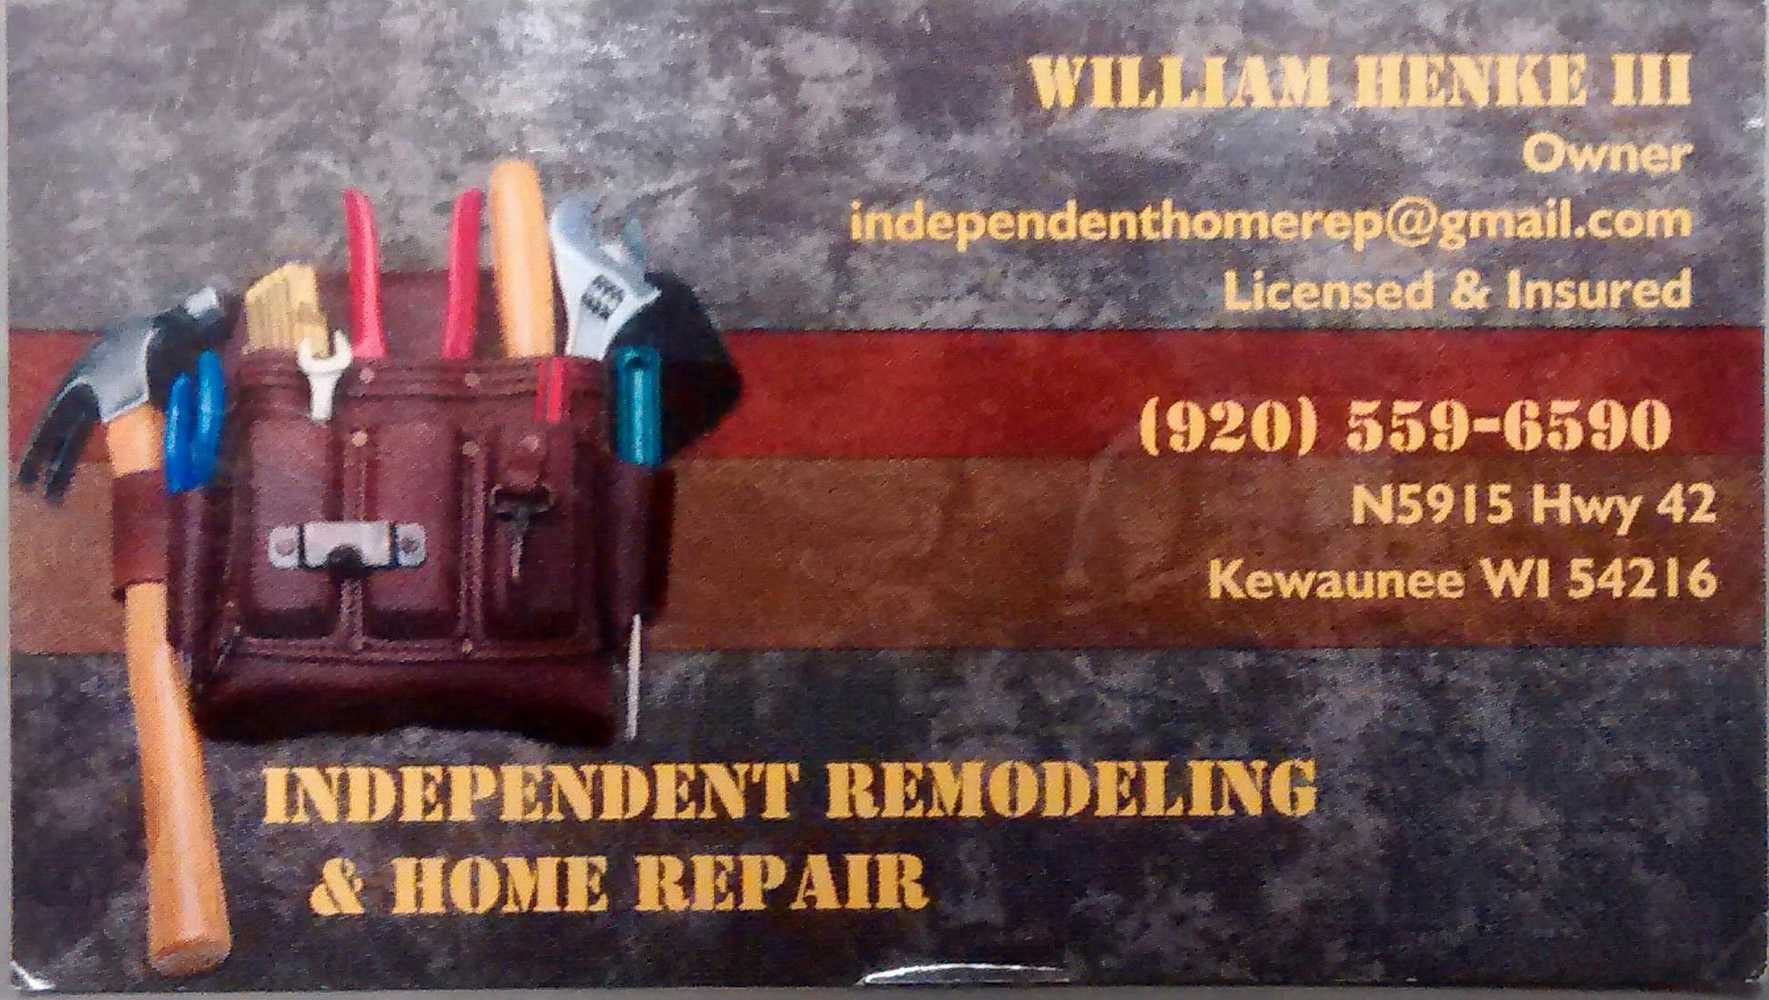 Photos from Independent Remodeling Home Repair